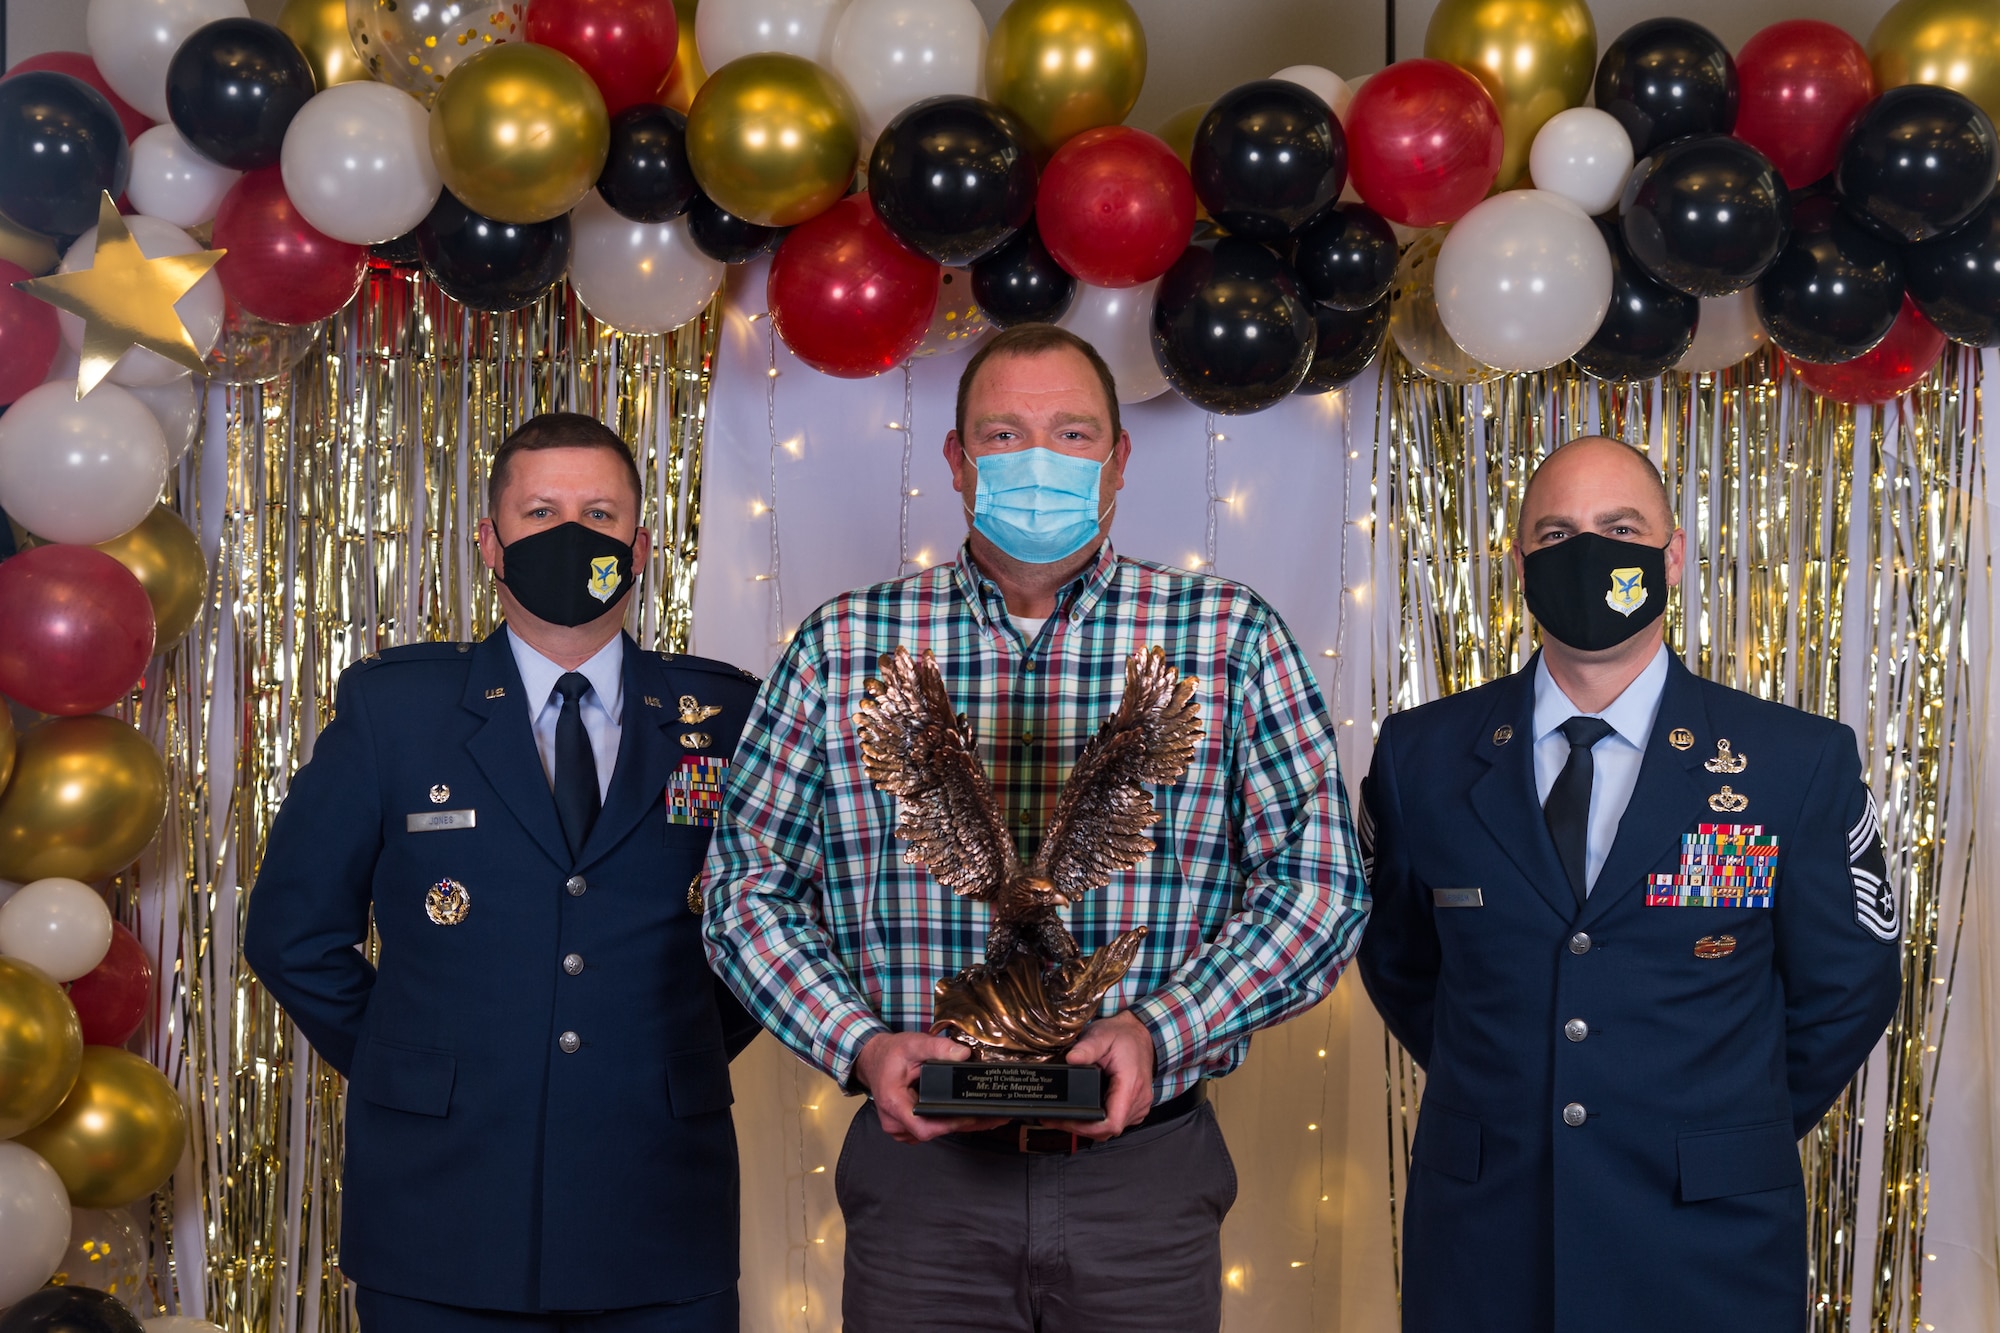 Eric Marquis, 436th Medical Support Squadron, poses for a photo with Col. Matthew Jones, 436th Airlift Wing commander, and Chief Master Sgt. Jeremiah Grisham, 436th AW interim command chief, following the conclusion of the 436th AW 2020 Annual Awards Ceremony at Dover Air Force Base, Delaware, Jan. 28, 2021. Marquis was named the wing's category II civilian of the year and received an eagle trophy. (U.S. Air Force photo by Roland Balik)